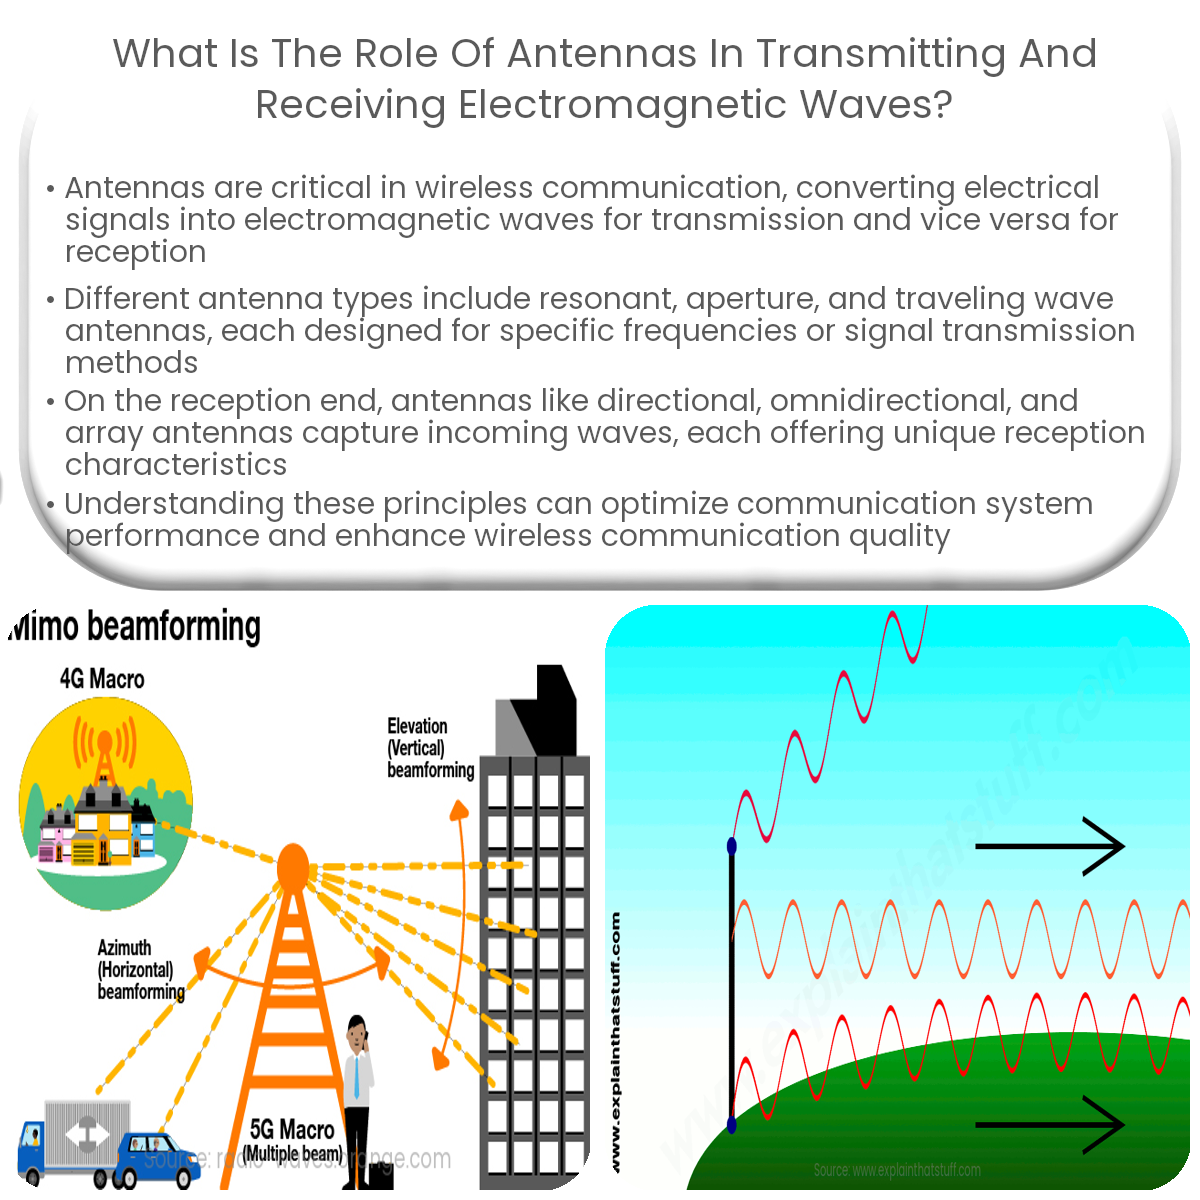 What is the role of antennas in transmitting and receiving electromagnetic waves?